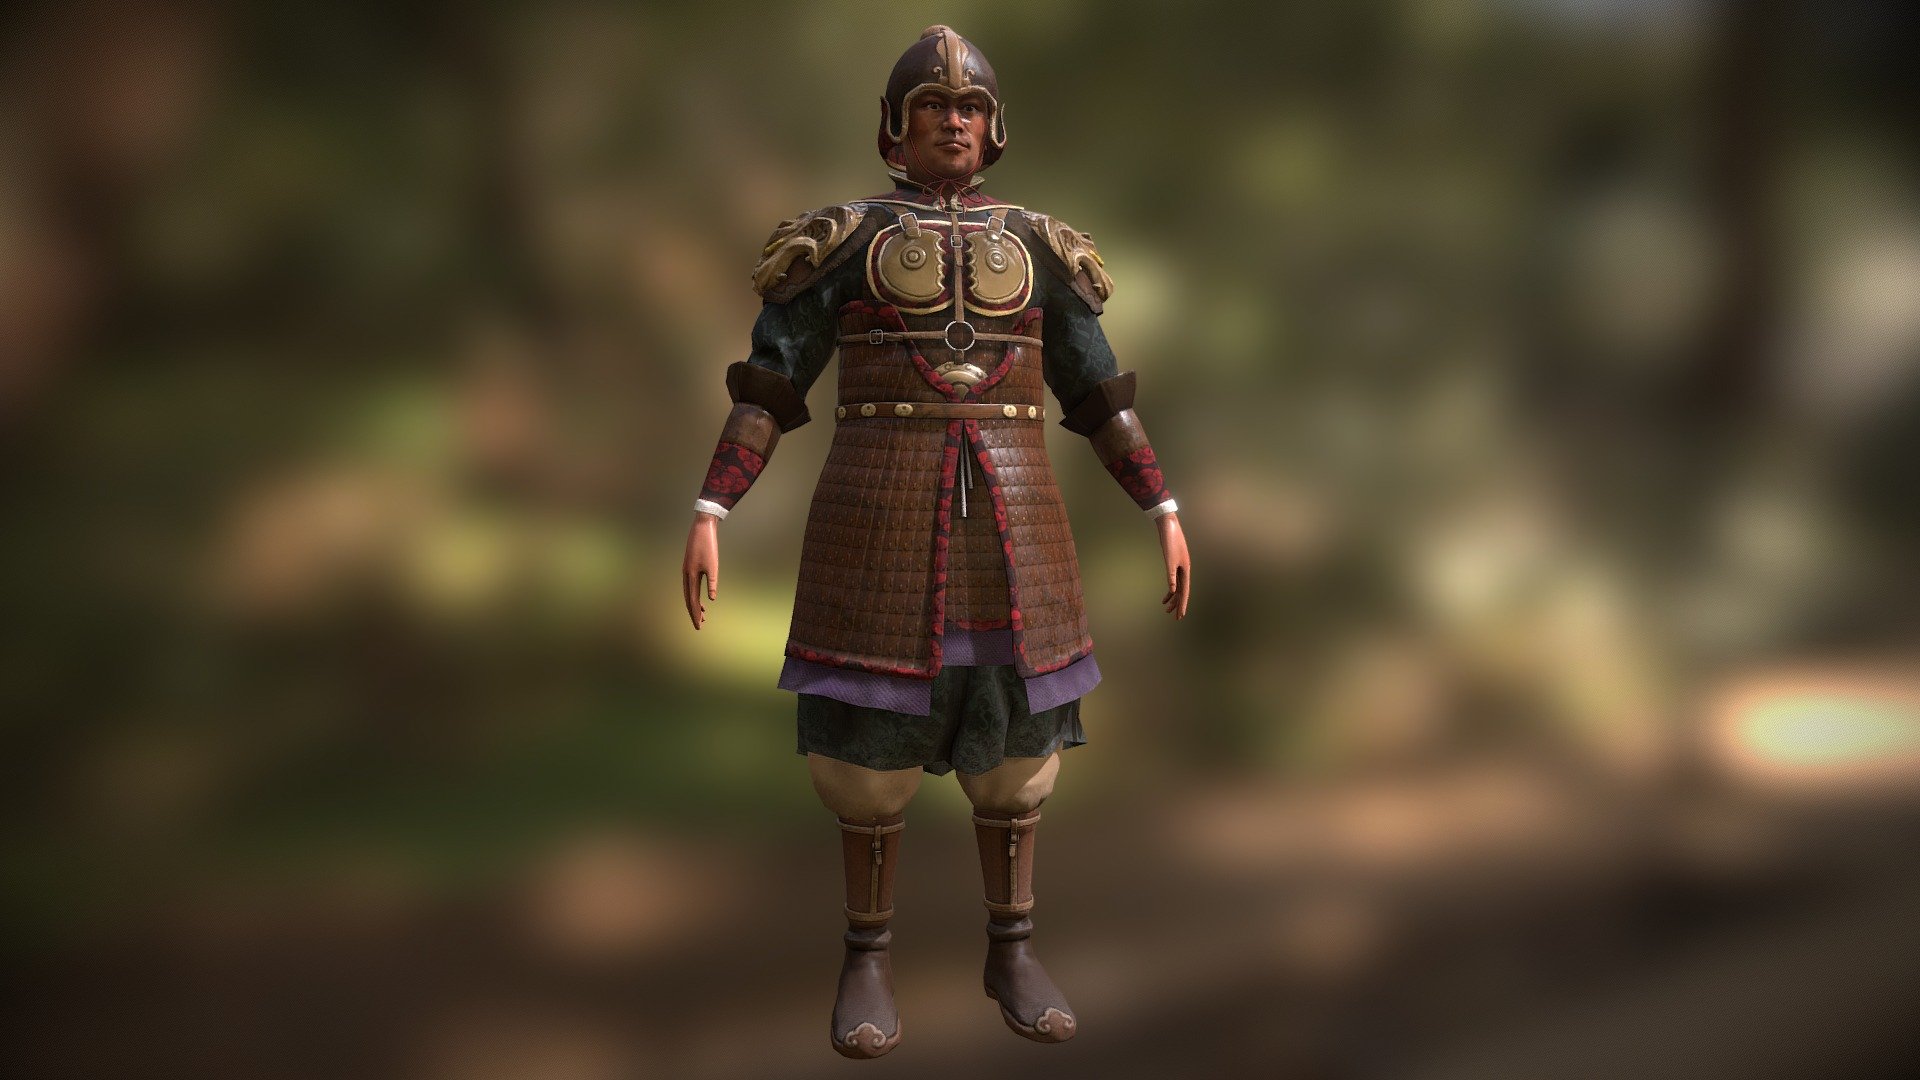 Realistic Traditional Ancient Asian Warrior Soldier 3D model:




Lowpoly model with Verts 12k, Faces 11k, Tris 22k

Good topology, Game ready, suitable for AR/VR

UV unwrapped, non-overlaping with 2 materials for body and cloths

PBR texture: Base color, Normal, Roughness, Metallic, Height, AO

Texture 4096*4096

File format: Maya (native), FBX, Obj, Unity package
 - Traditional Ancient Ly Dynasty Warrior - Buy Royalty Free 3D model by Dzung Dinh (@hugechimera) 3d model